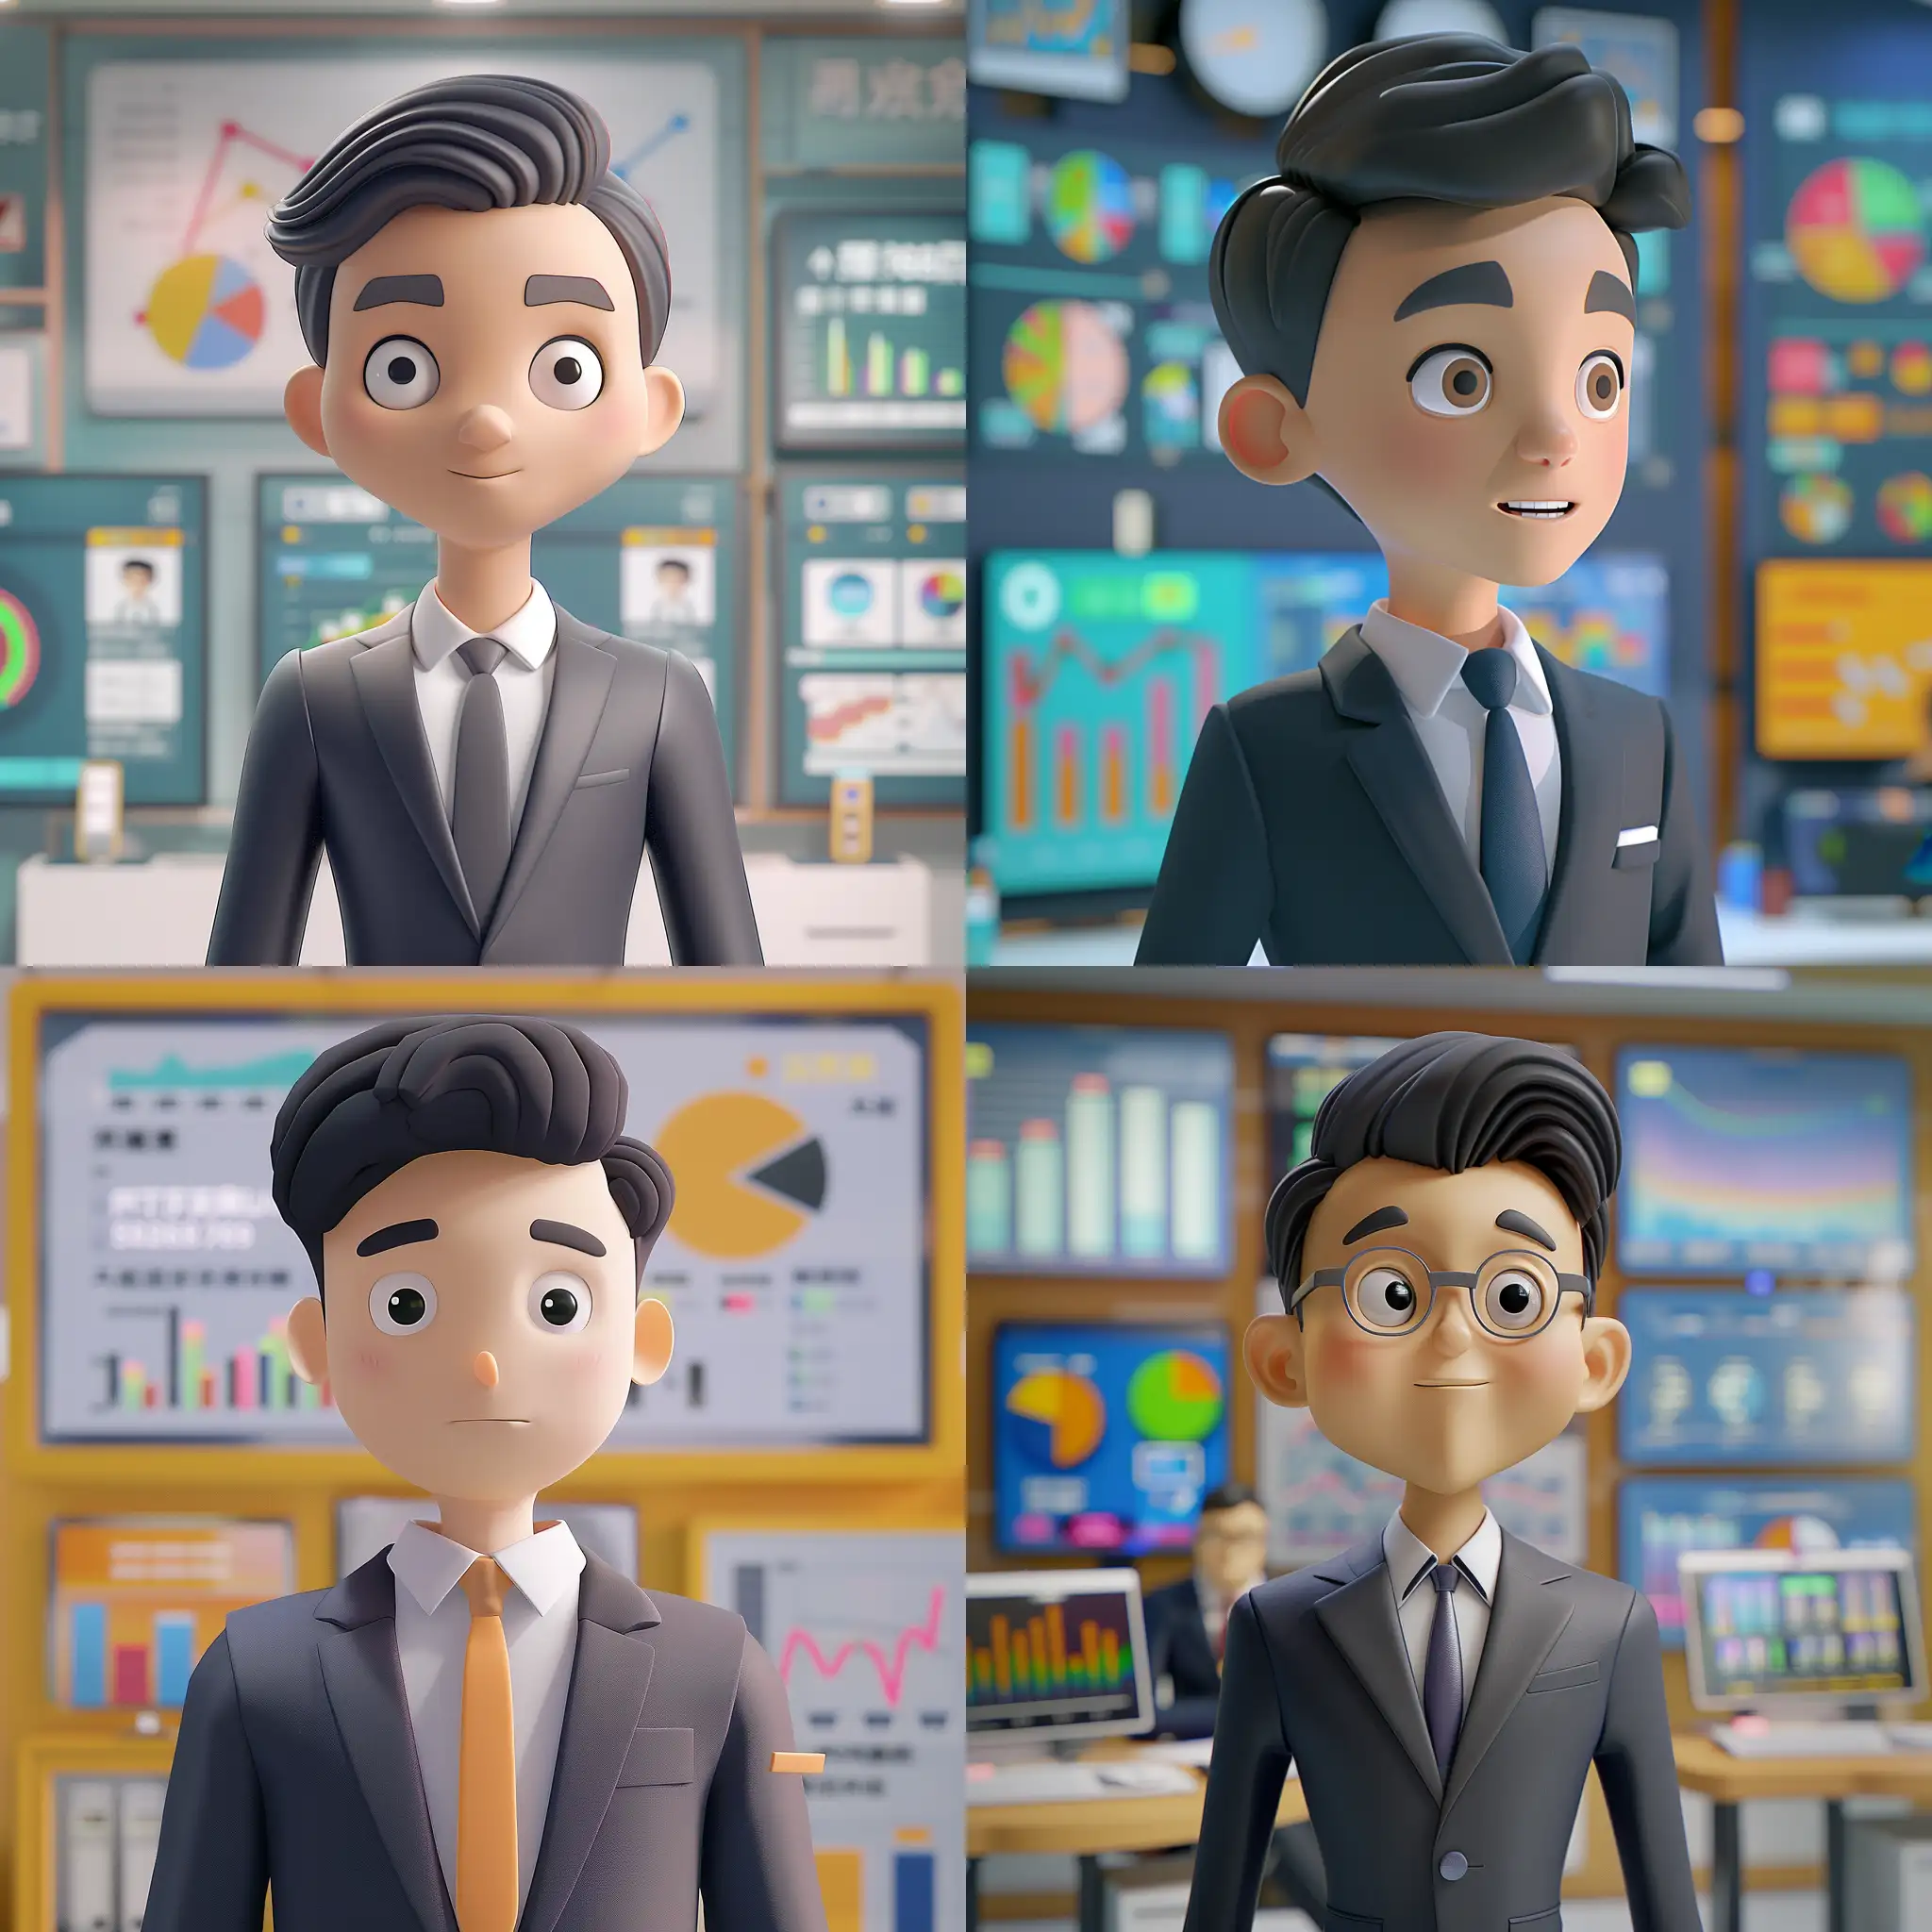 Create a 3D animated character of a sales expert, skillfully negotiating and closing deals in a dynamic office space in Hong Kong, adopting the artistic style and character proportions. The character should have a confident and persuasive expression, dressed in professional business attire. The setting should include interactive displays and sales performance charts. Utilize a color palette focusing on hues close to #2563eb to complement the professional and energetic mood of the sales environment.
